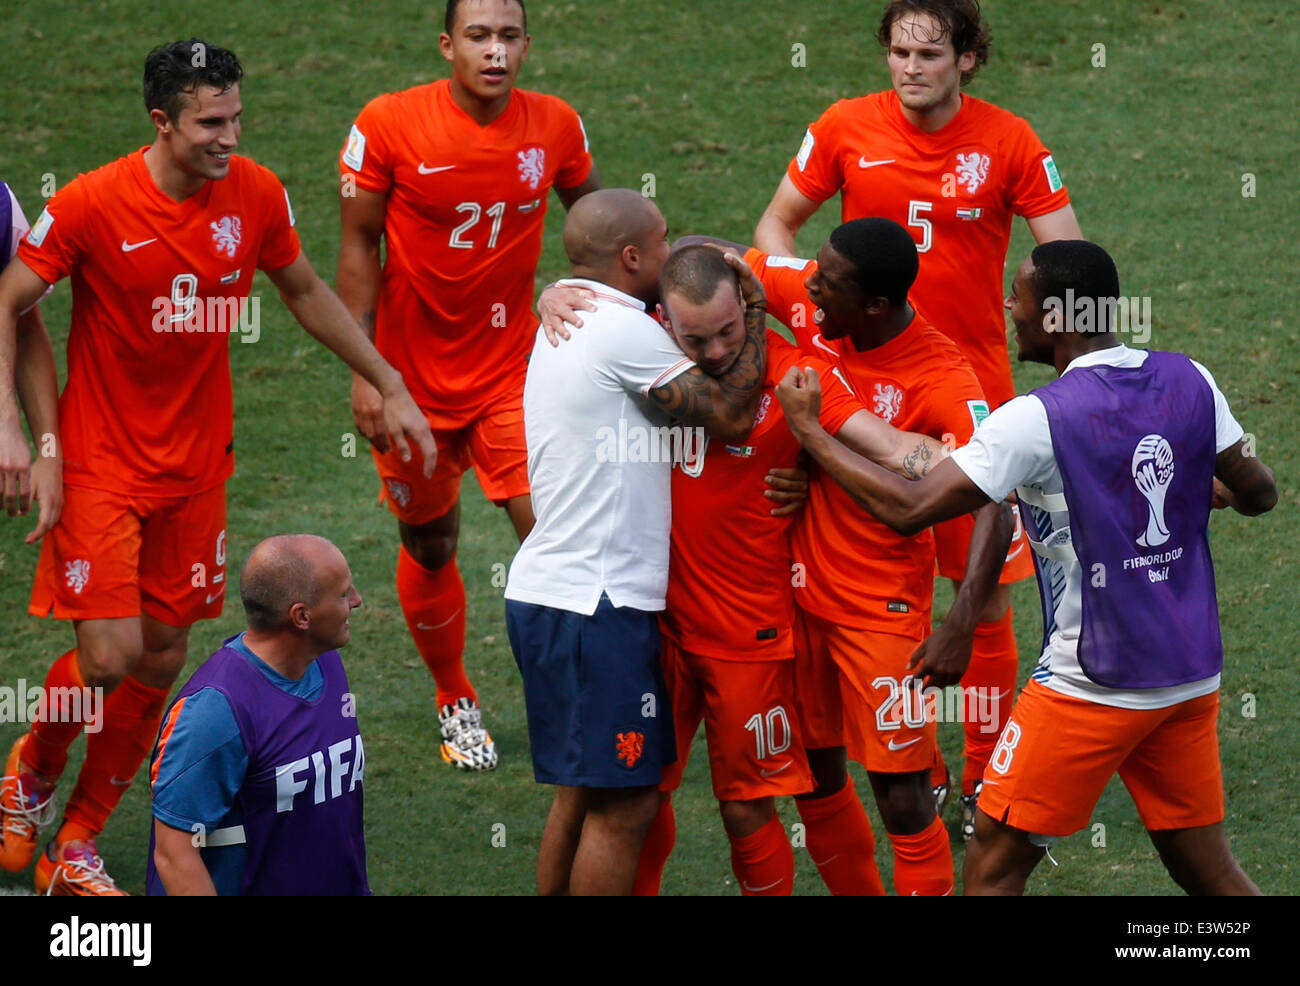 Fortaleza, Brazil. 29th June, 2014. Netherlands' Wesley Sneijder (3rd R, front) celebrates a goal during a Round of 16 match between Netherlands and Mexico of 2014 FIFA World Cup at the Estadio Castelao Stadium in Fortaleza, Brazil, on June 29, 2014. Netherlands won 2-1 over Mexico and qualified for Quarter-finals on Sunday. Credit:  Liao Yujie/Xinhua/Alamy Live News Stock Photo